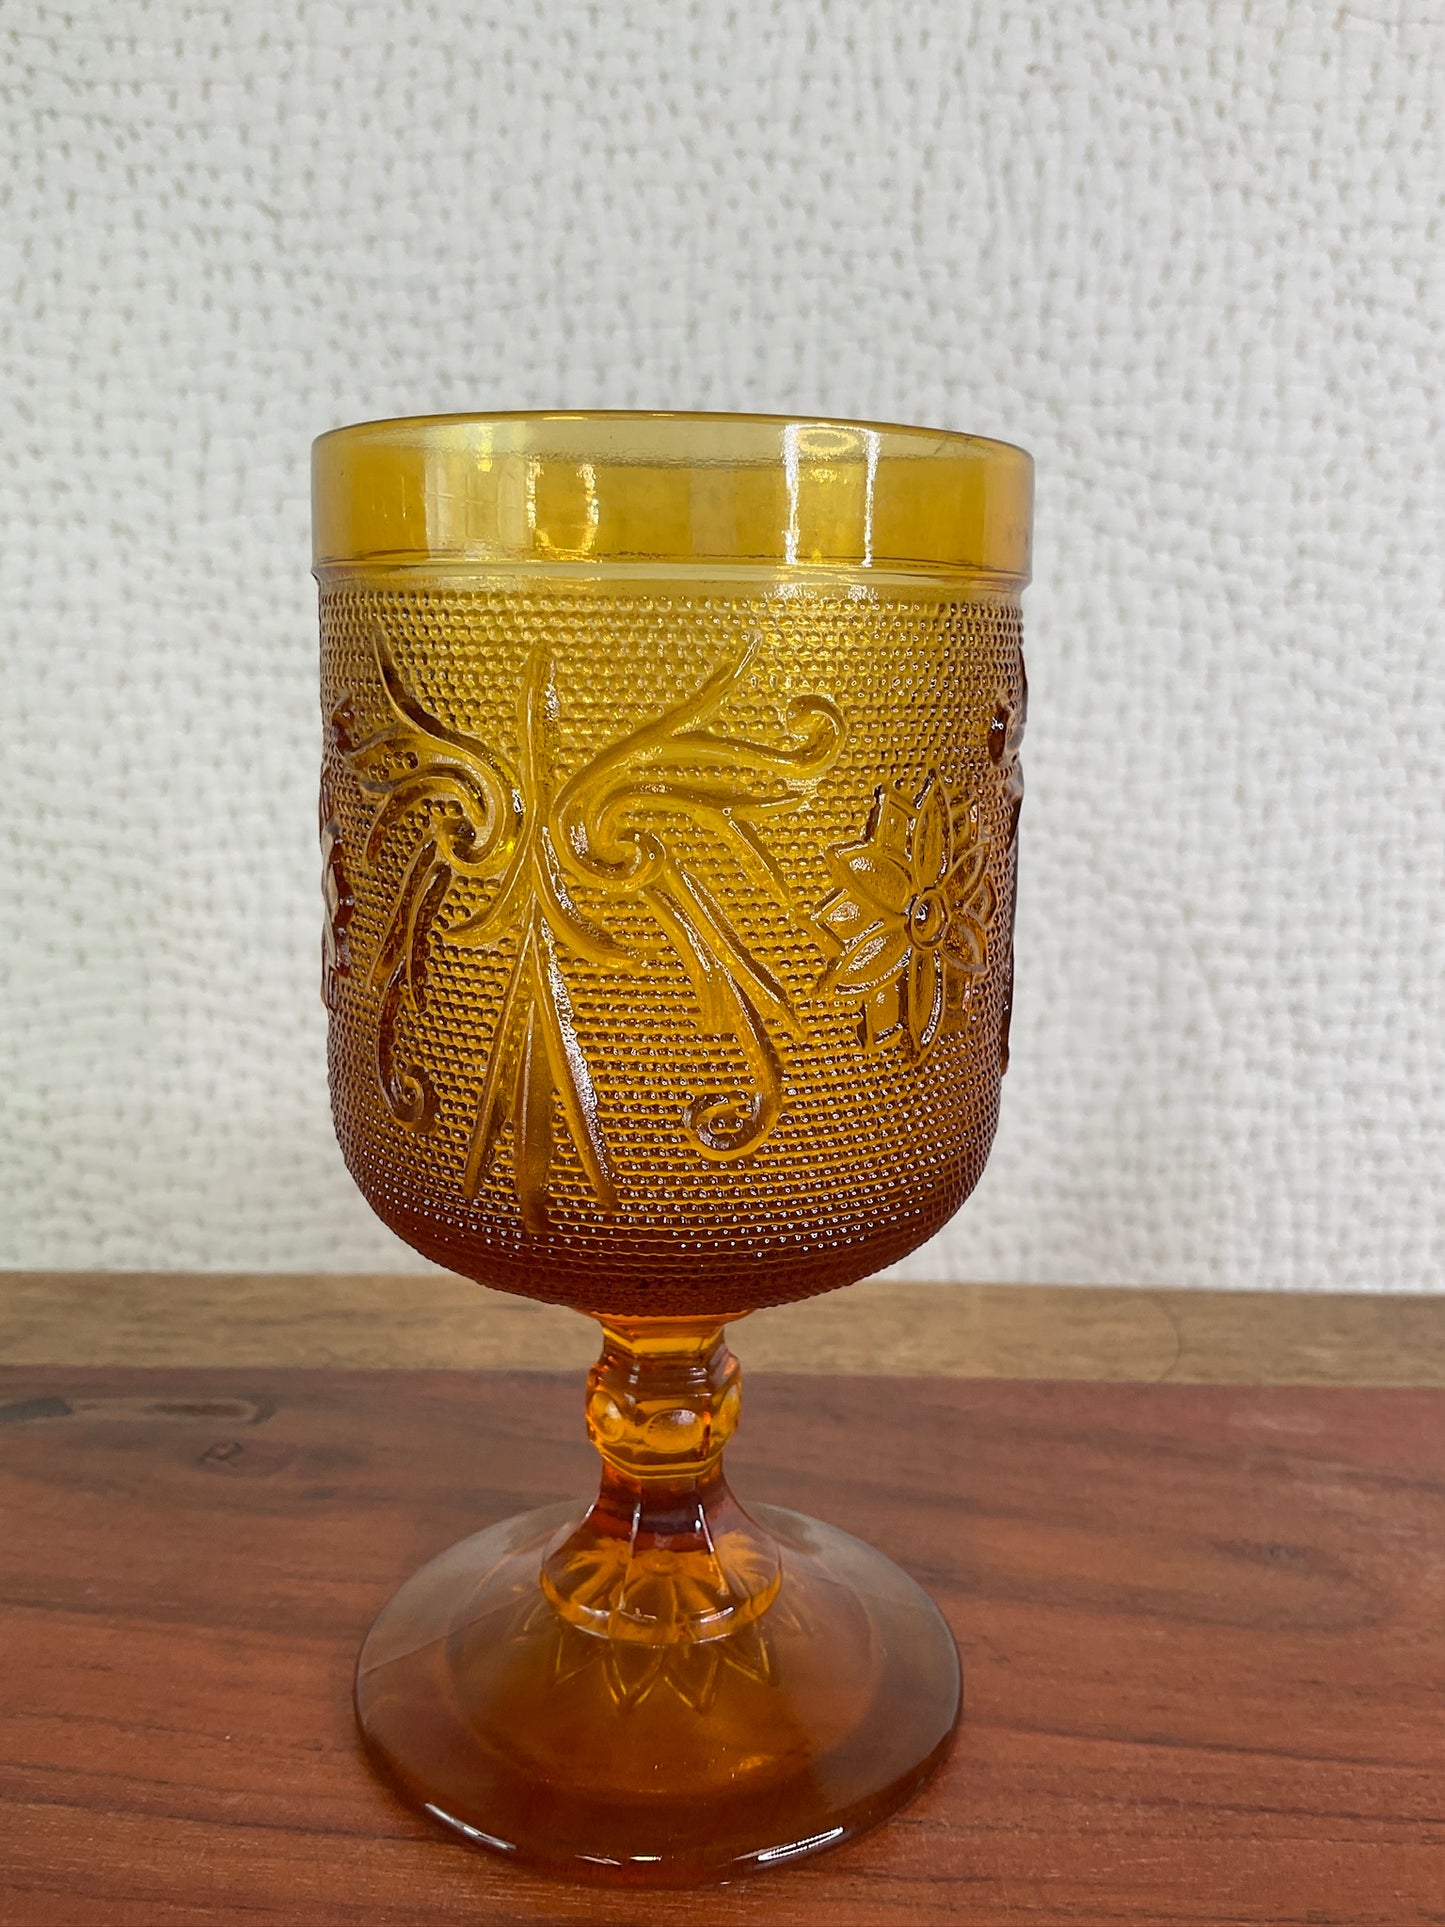 Vintage Amber Glass Dishes, Sold Separately